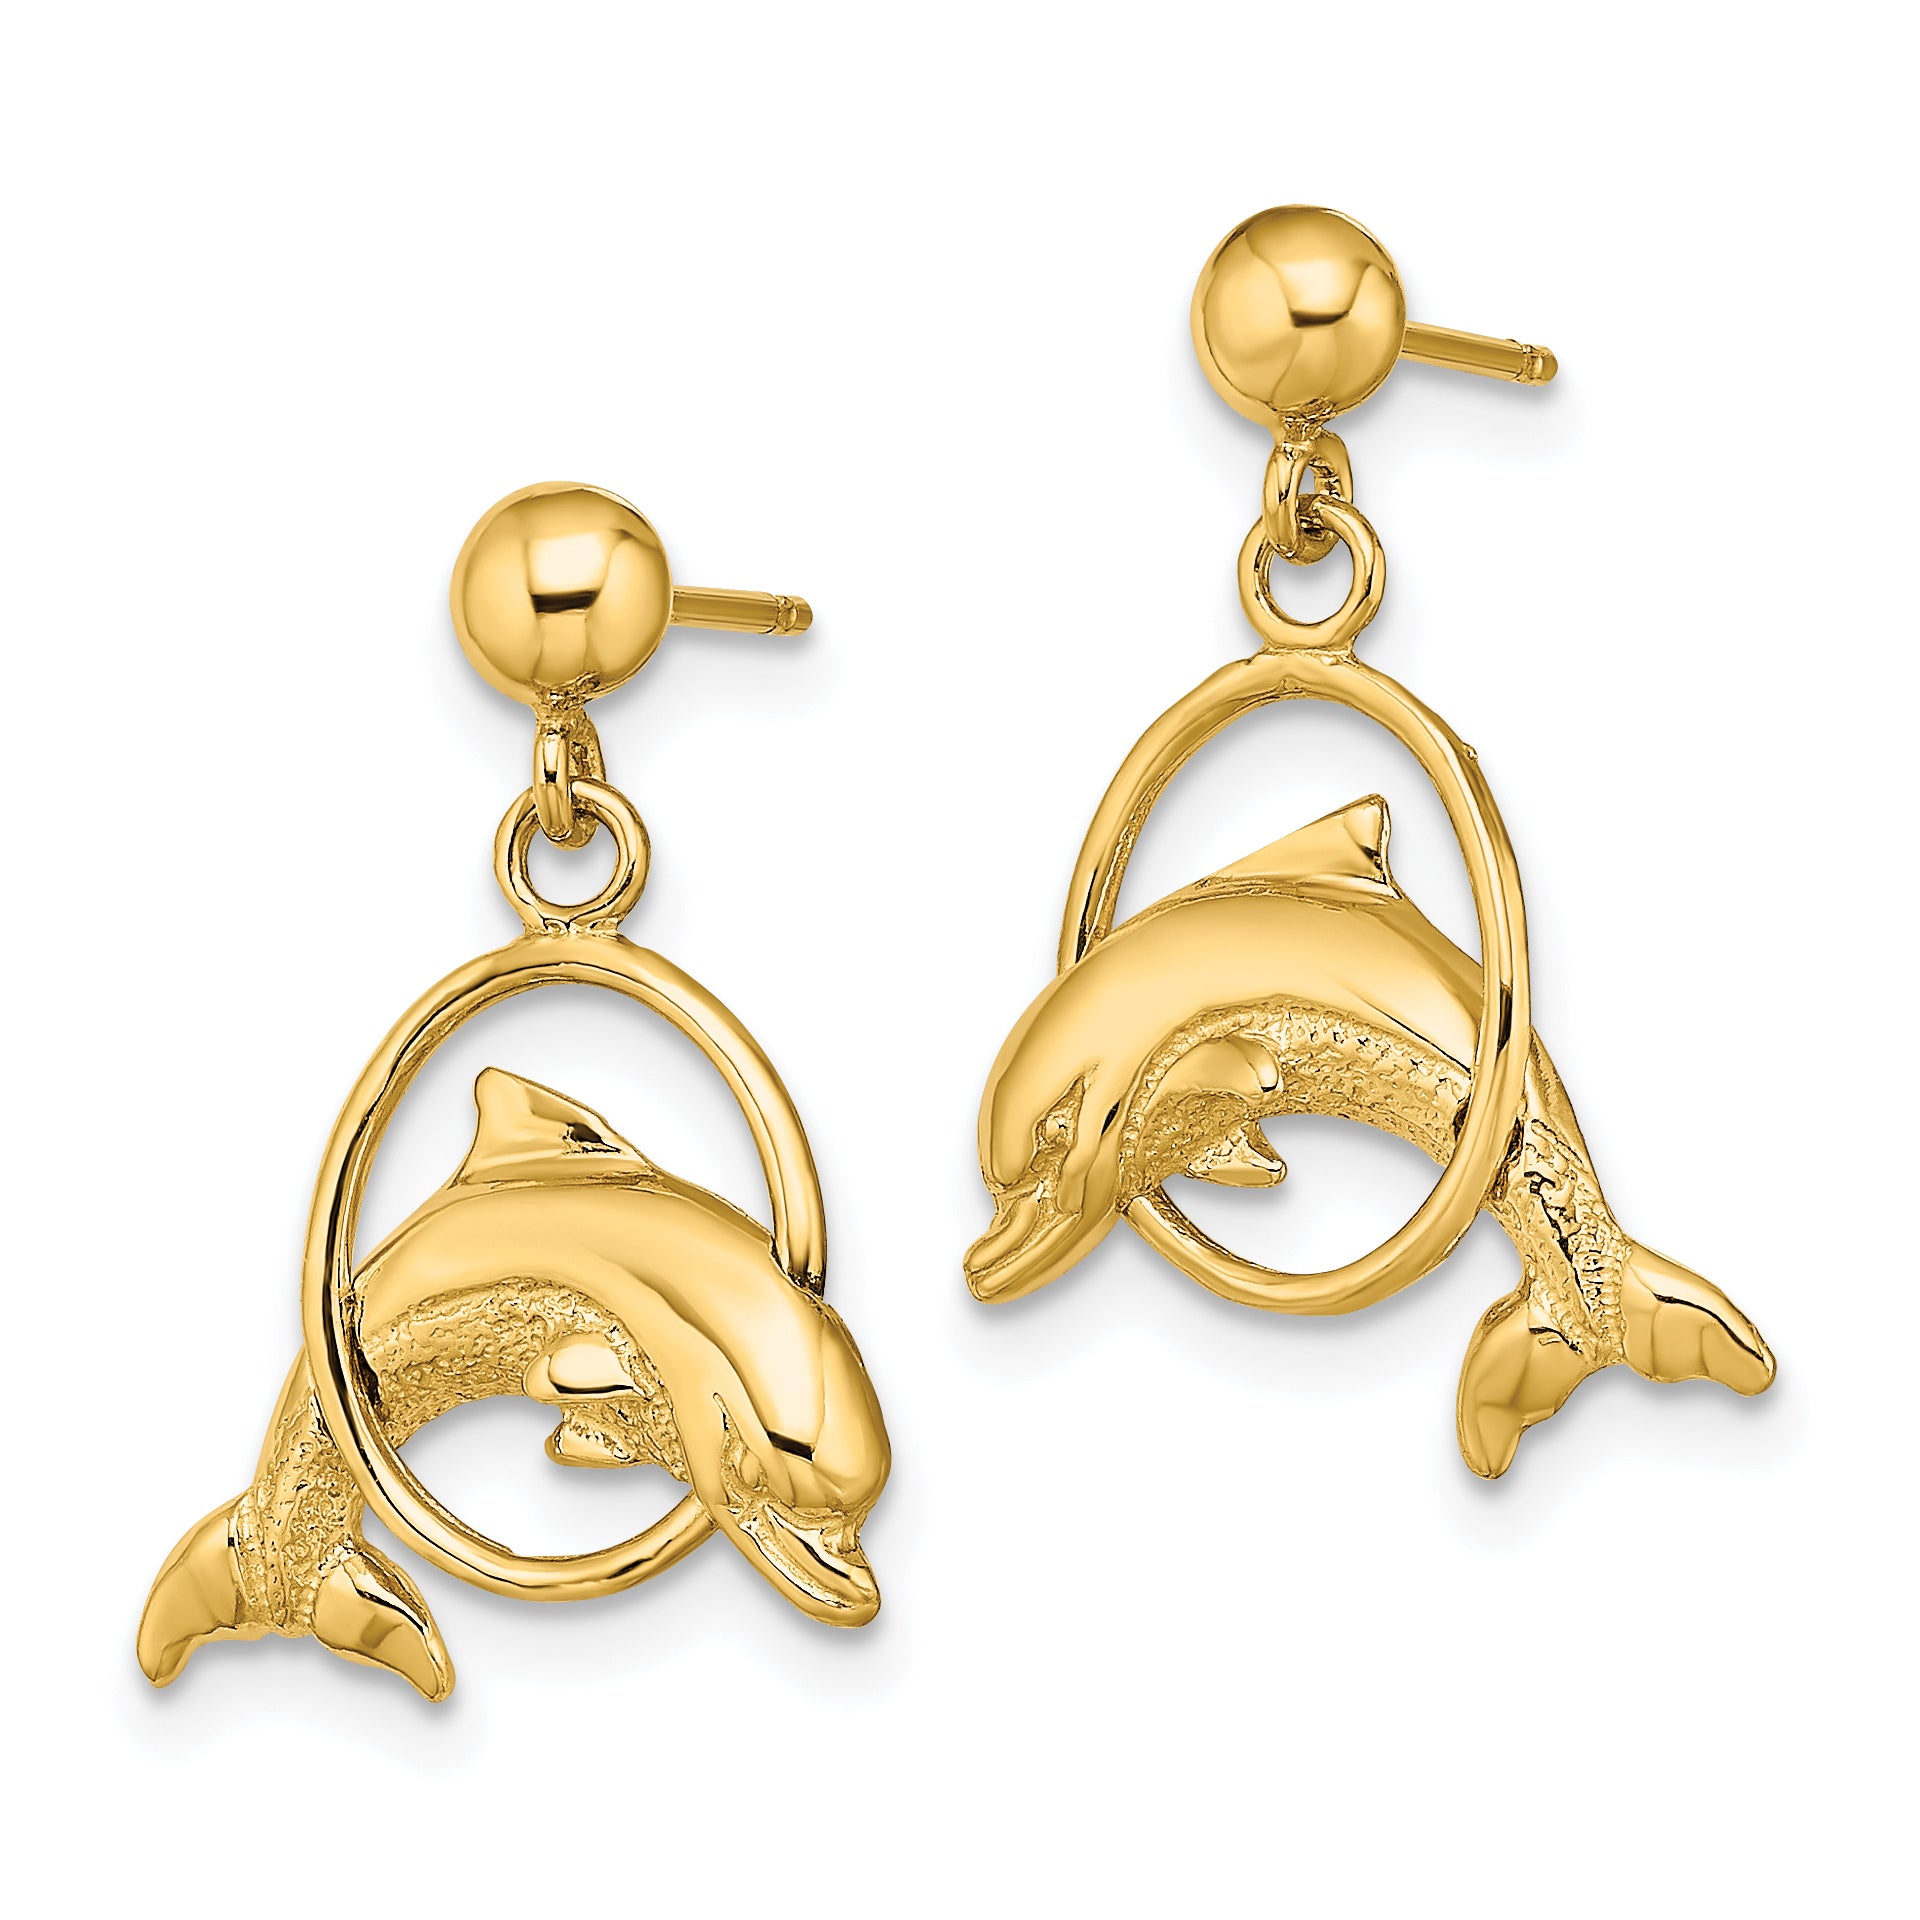 10K Polished Dolphin Jumping Through Hoop Earrings